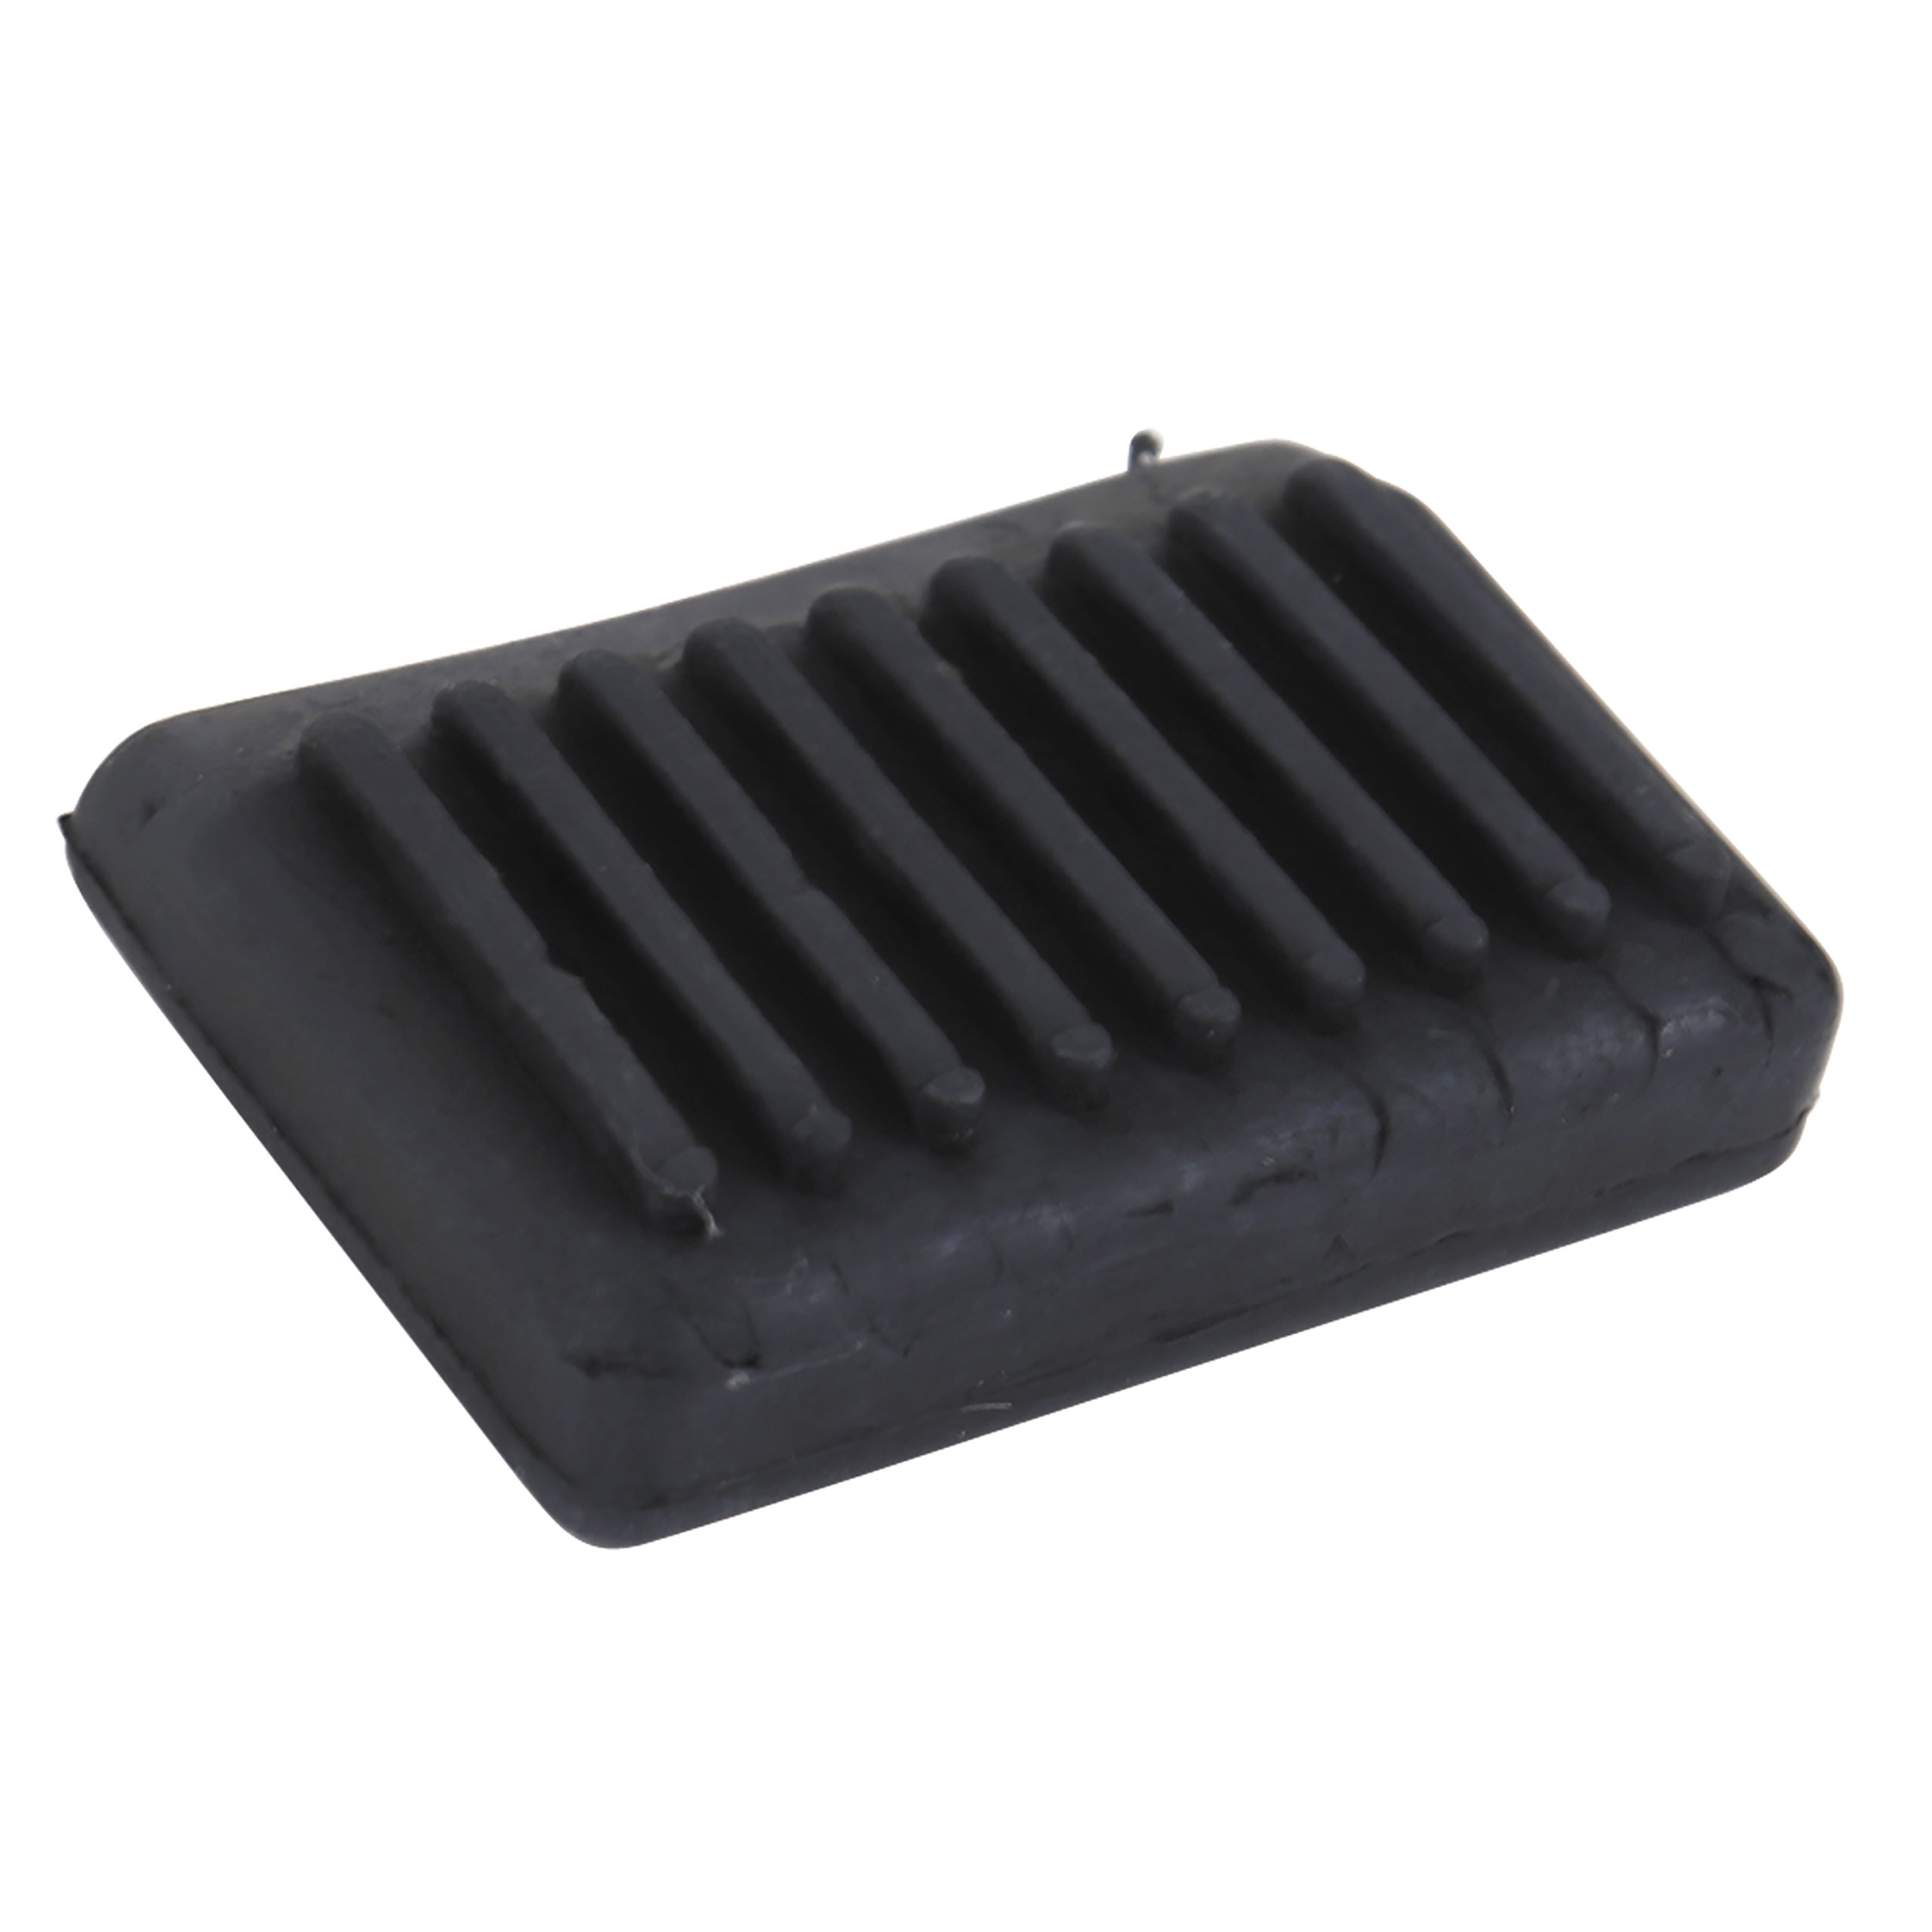 First Generation 1967-1968 Ford Mustang Windshield Washer Pump Pedal Pad - Daniel Carpenter